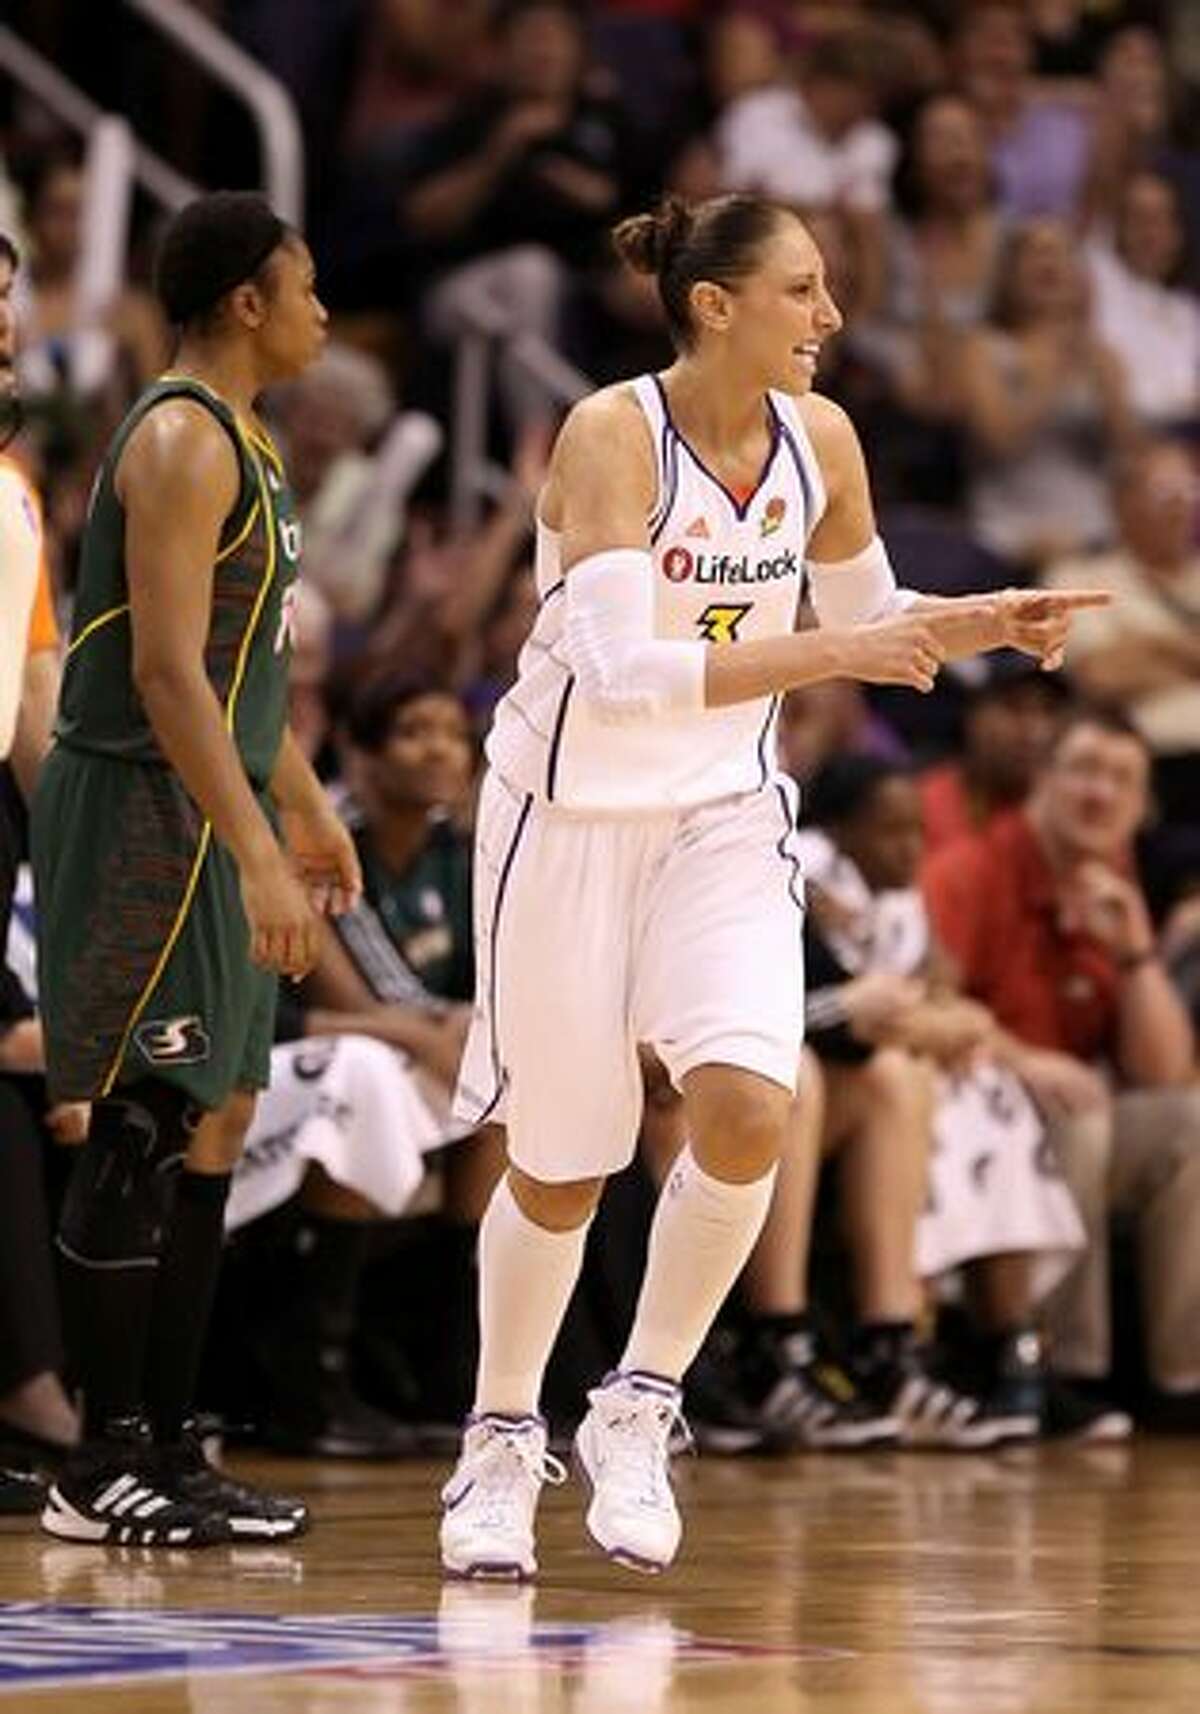 Diana Taurasi #3 of the Phoenix Mercury celebrates after hitting a three point shot against the Seattle Storm.